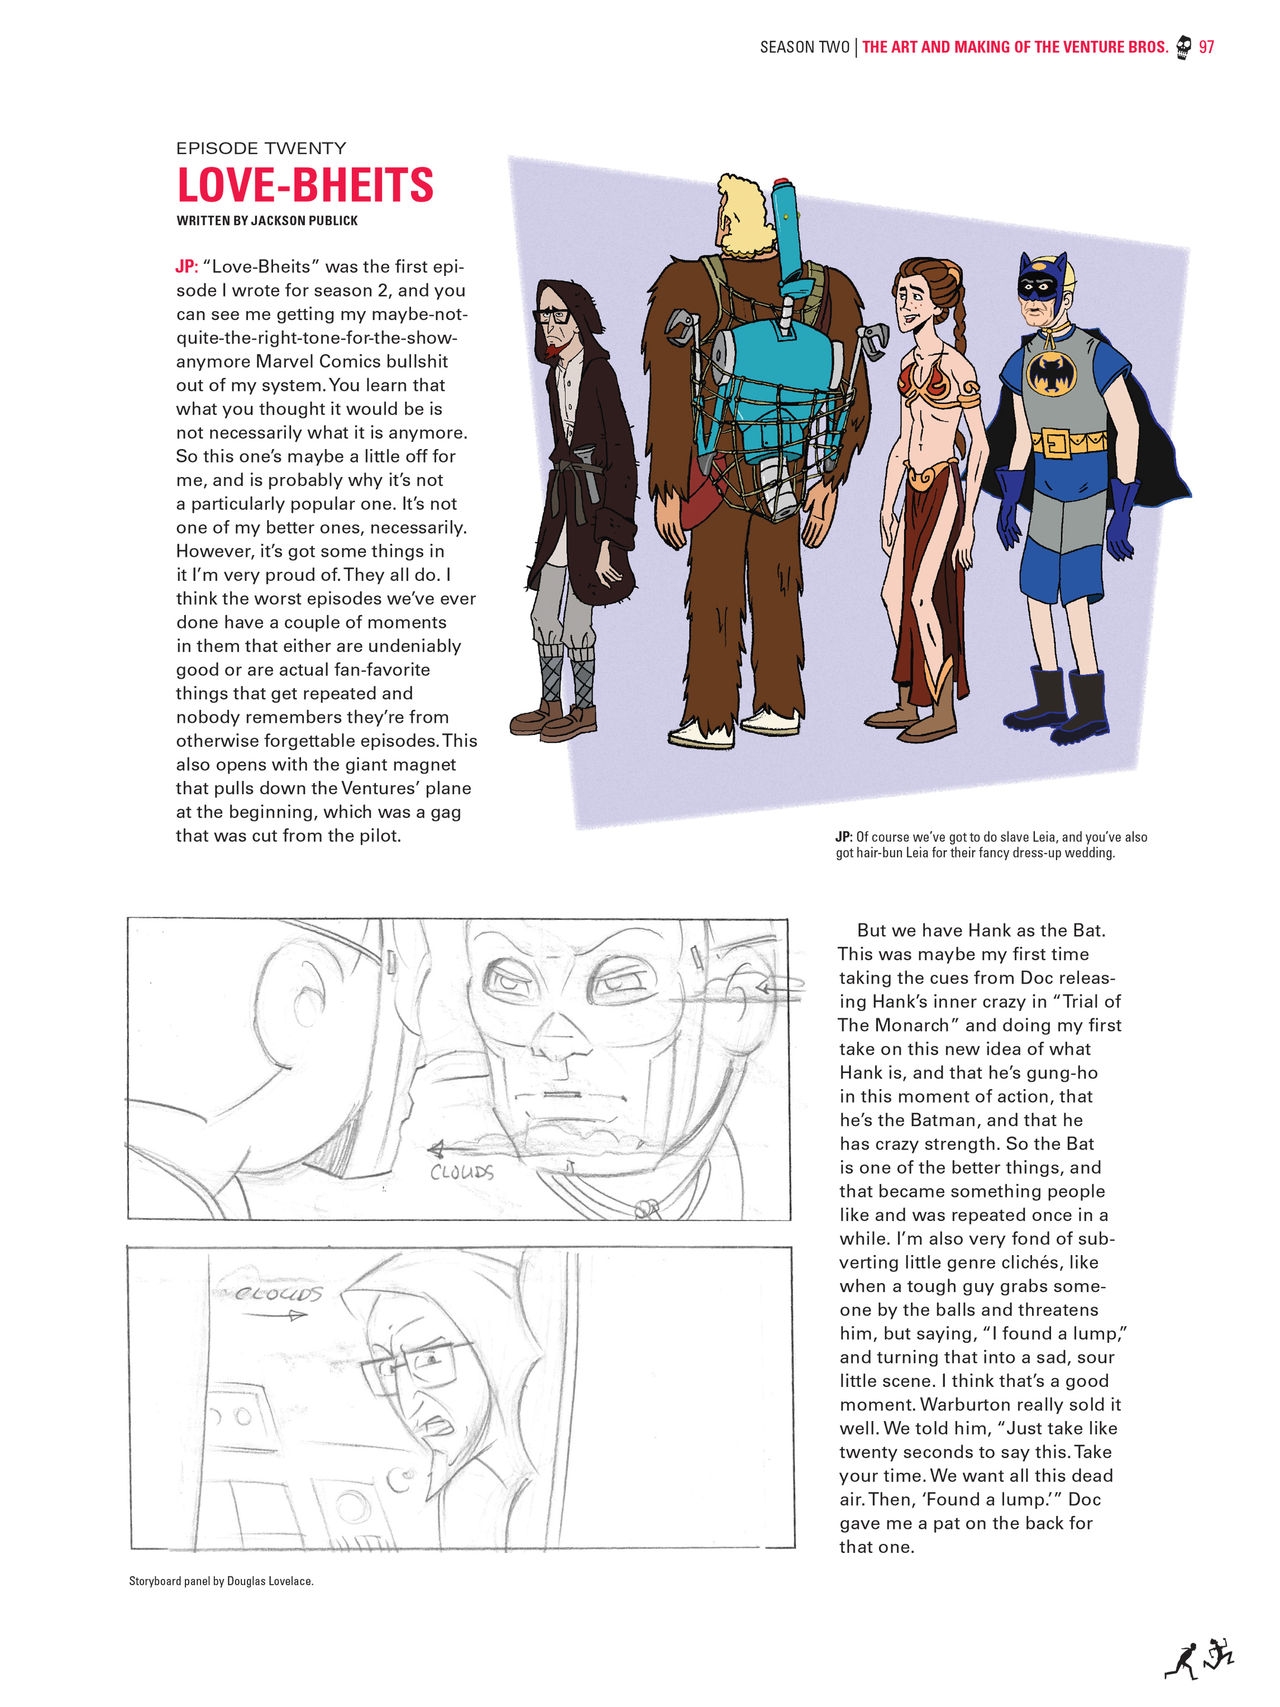 Go Team Venture! - The Art and Making of the Venture Bros 96